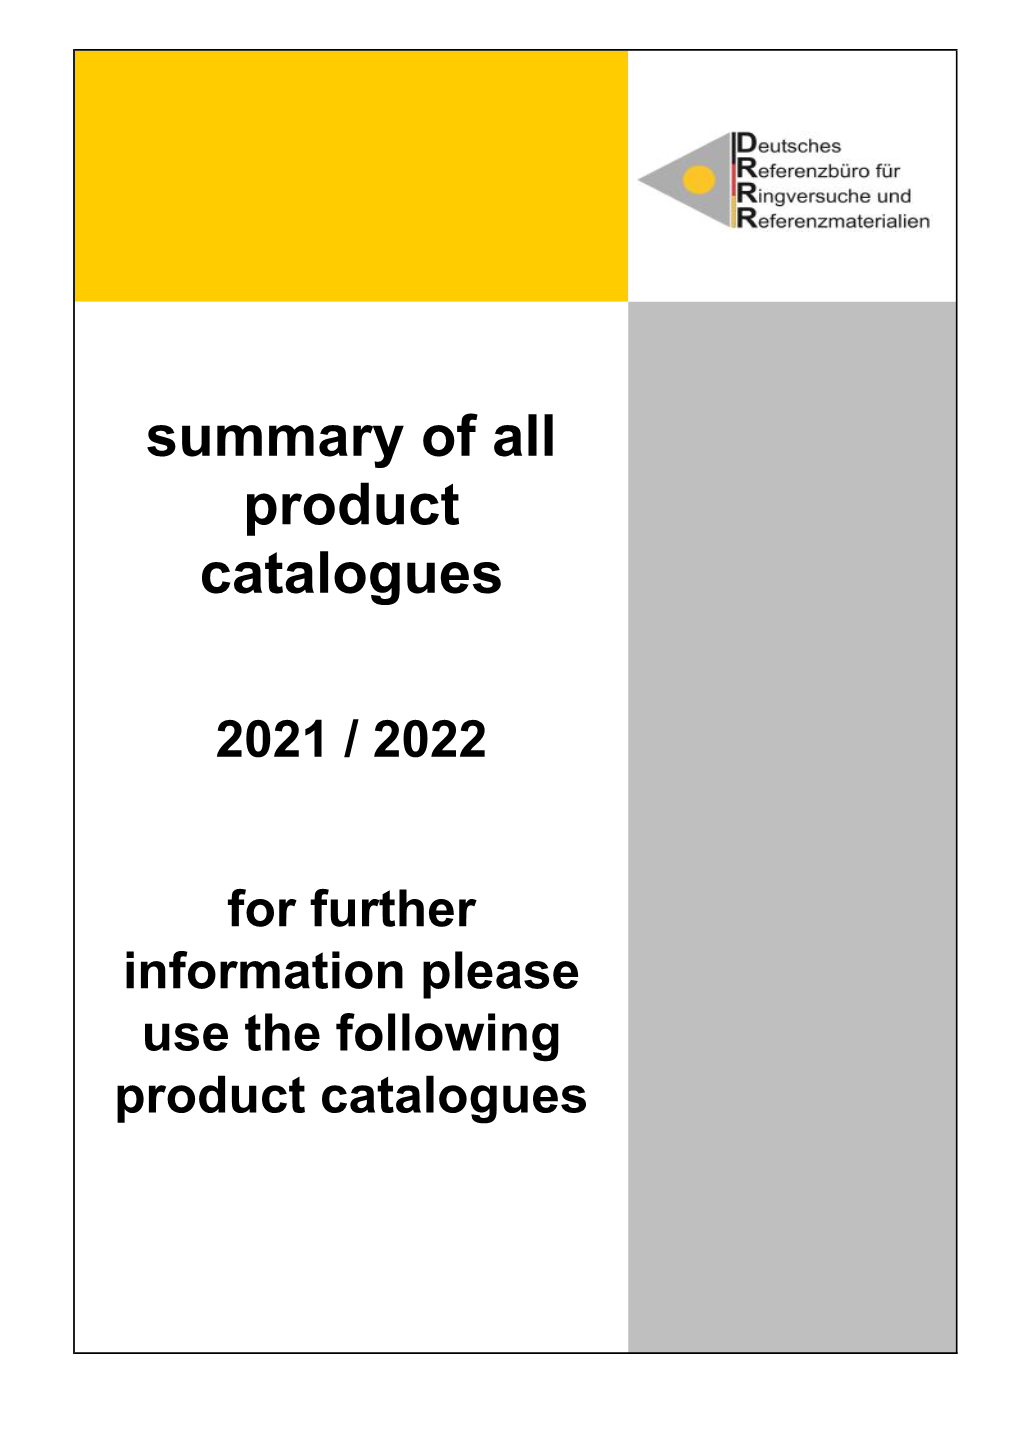 Summary of All Product Catalogues 23.06.2021